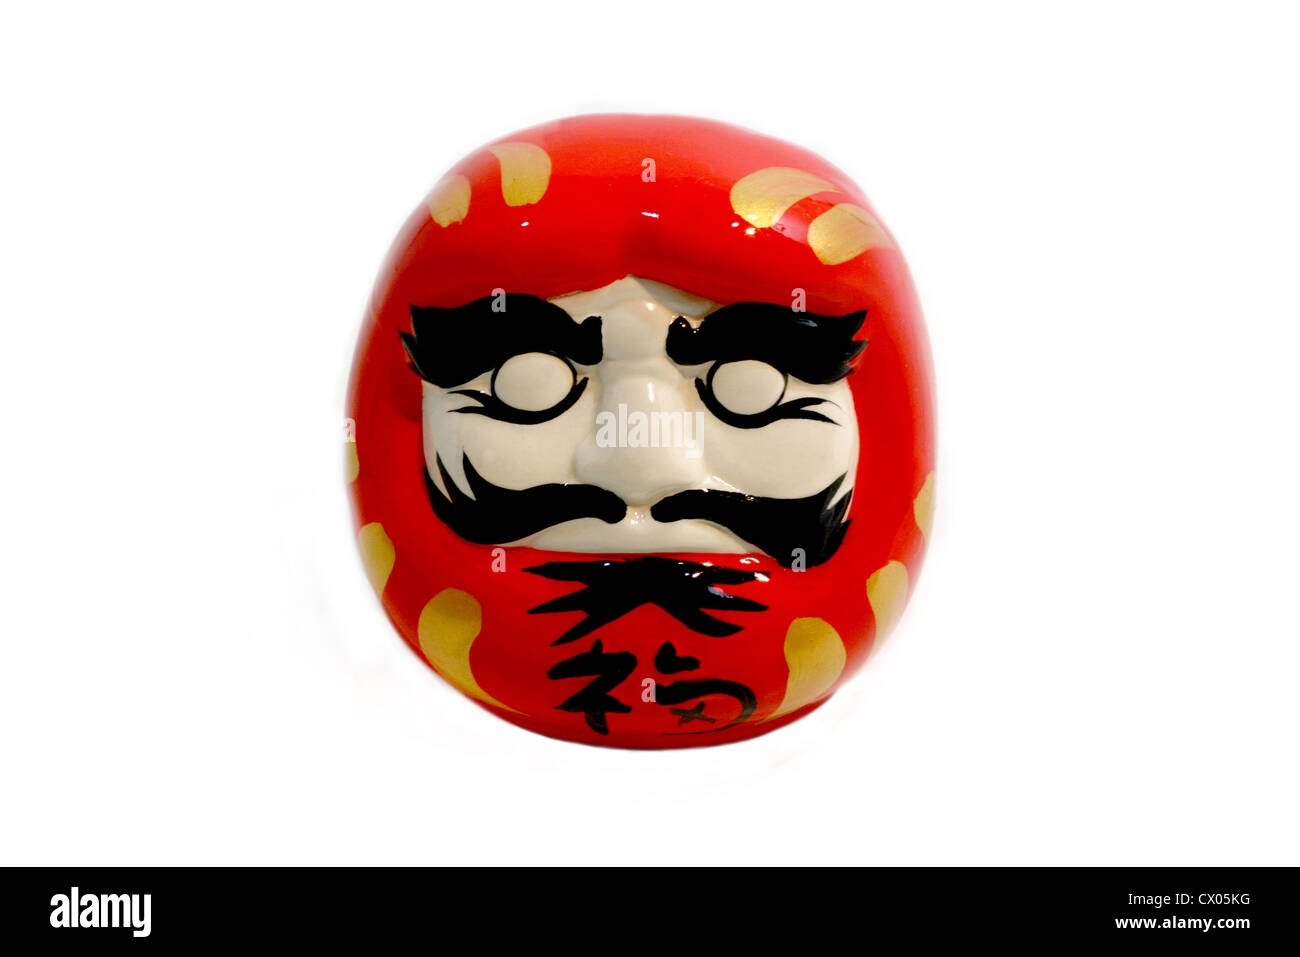 The Daruma doll isolated with white background Stock Photo